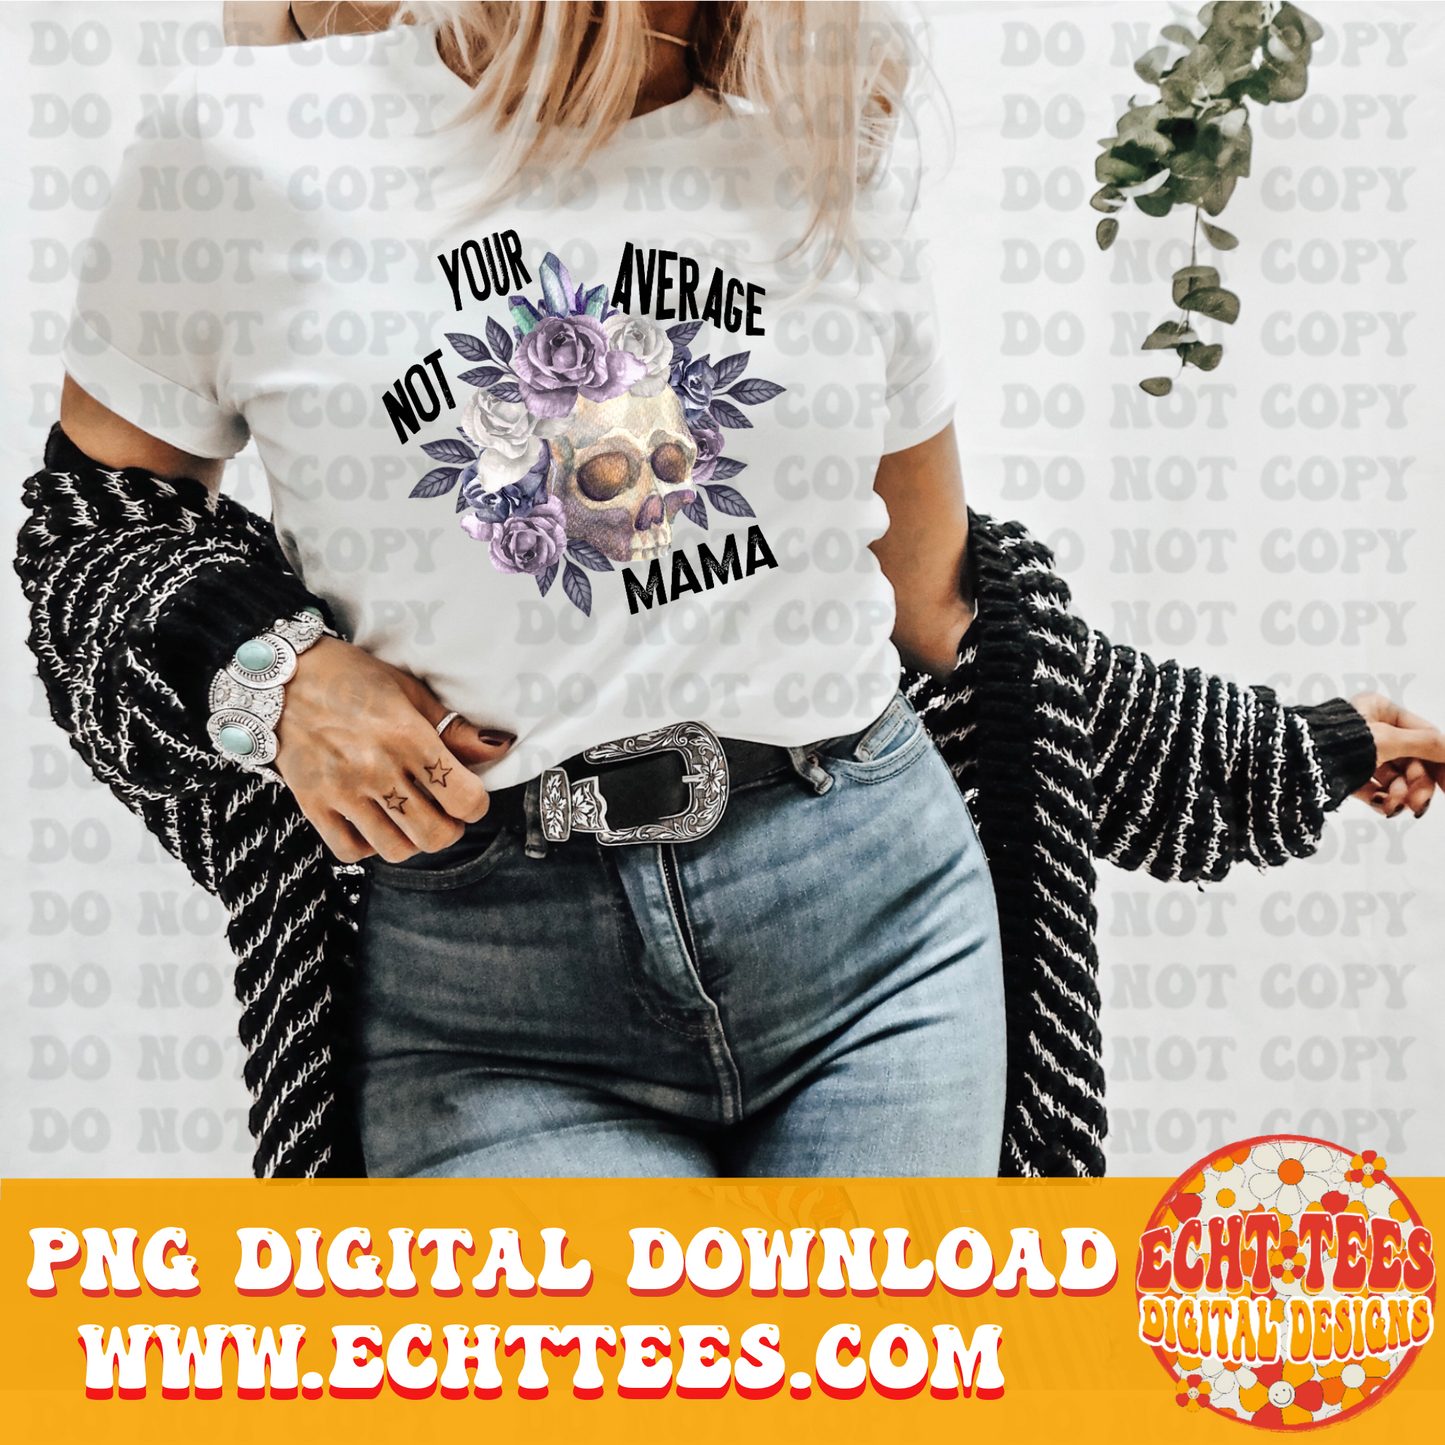 Not Your Average Mama PNG Digital Download